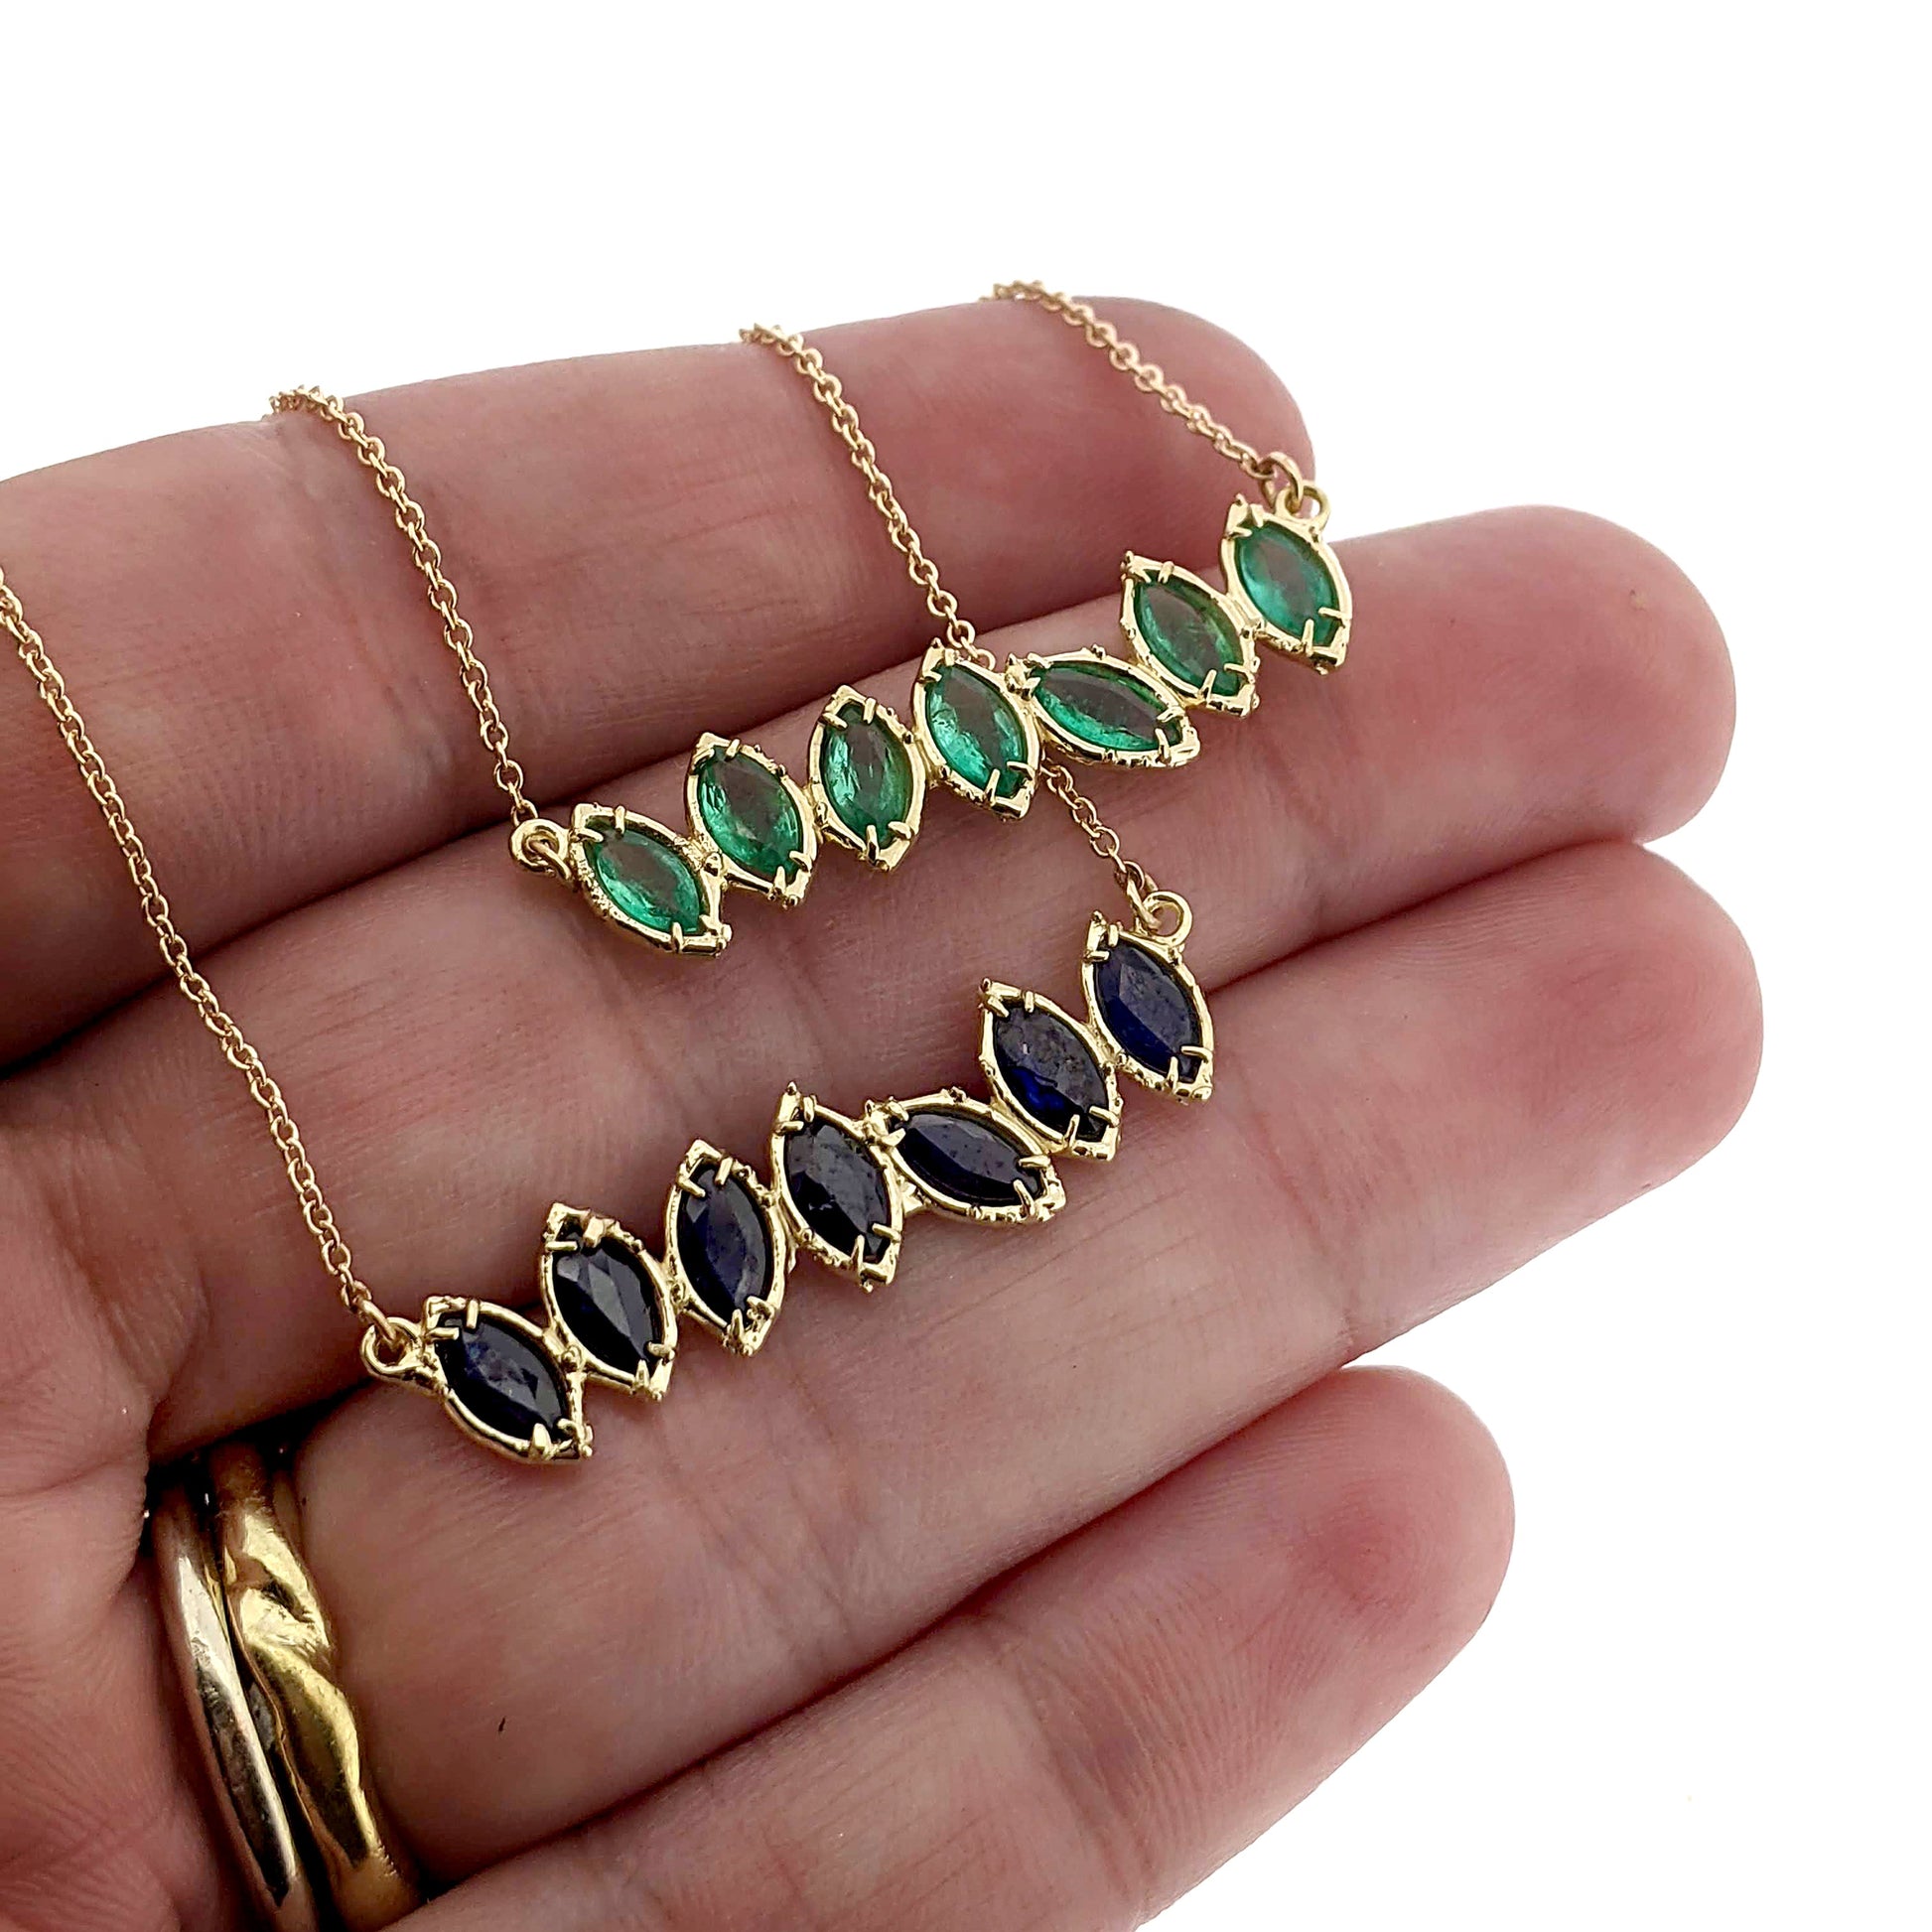 Close up view of sapphire and peridot Cherin Necklaces drapped over a woman's hand to help give an idea of its scale.